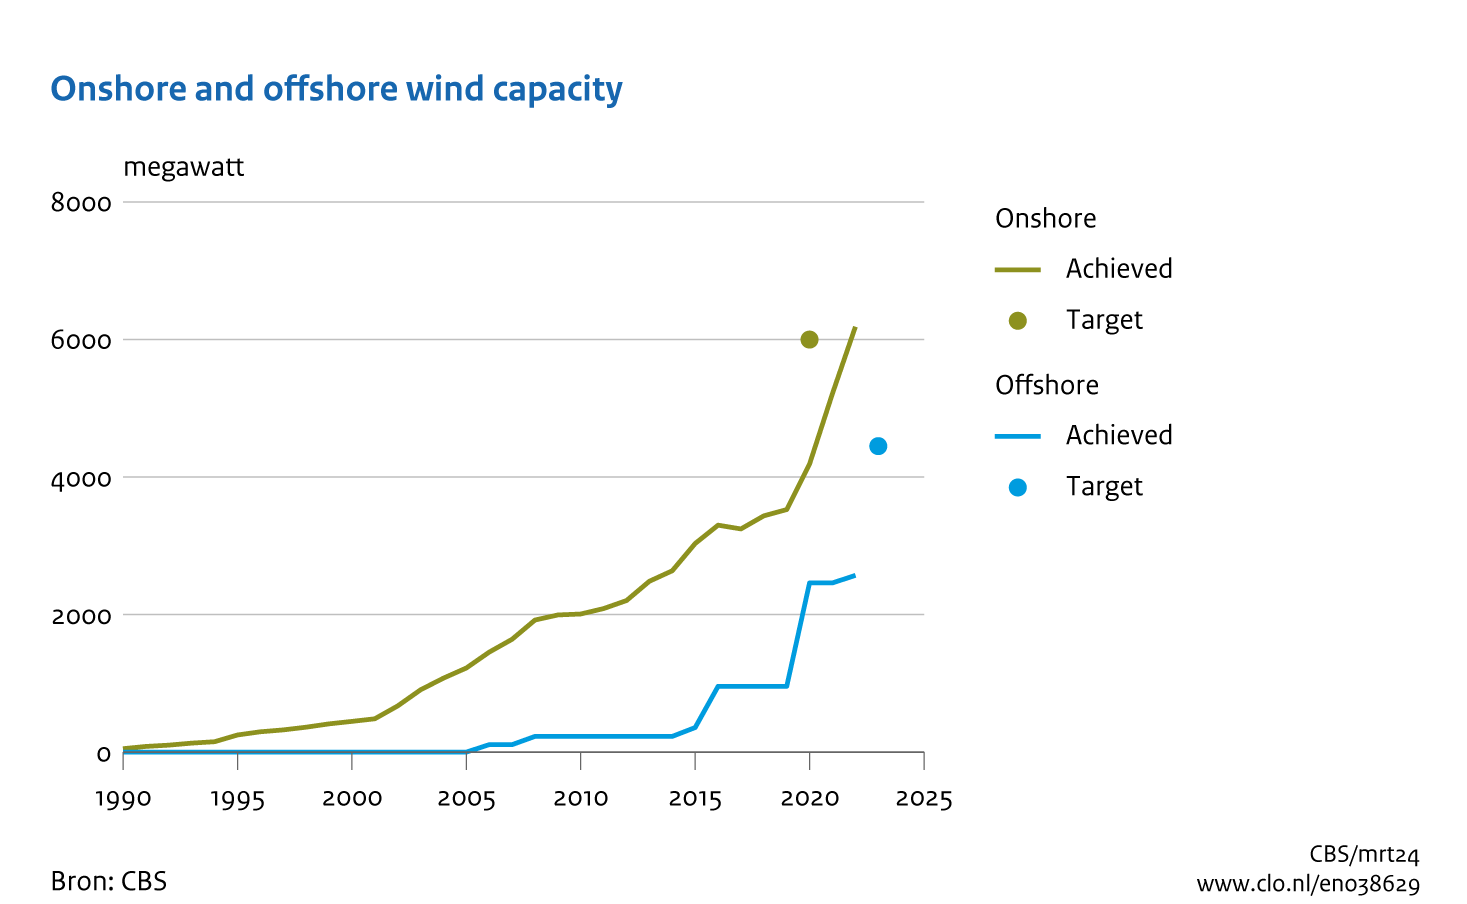 Line graph showing the installed wind energy capacity in megawatts on land and sea from 1990 to 2022. Plus the target for onshore capacity in 2020 and at sea in 2023 is indicated. The onshore target of 6000 megawatts in 2020 will not be achieved until 2022. The target at sea in 2023 is 4450 watts, while the installed capacity in 2022 is still far below this at 2570 megawatts.